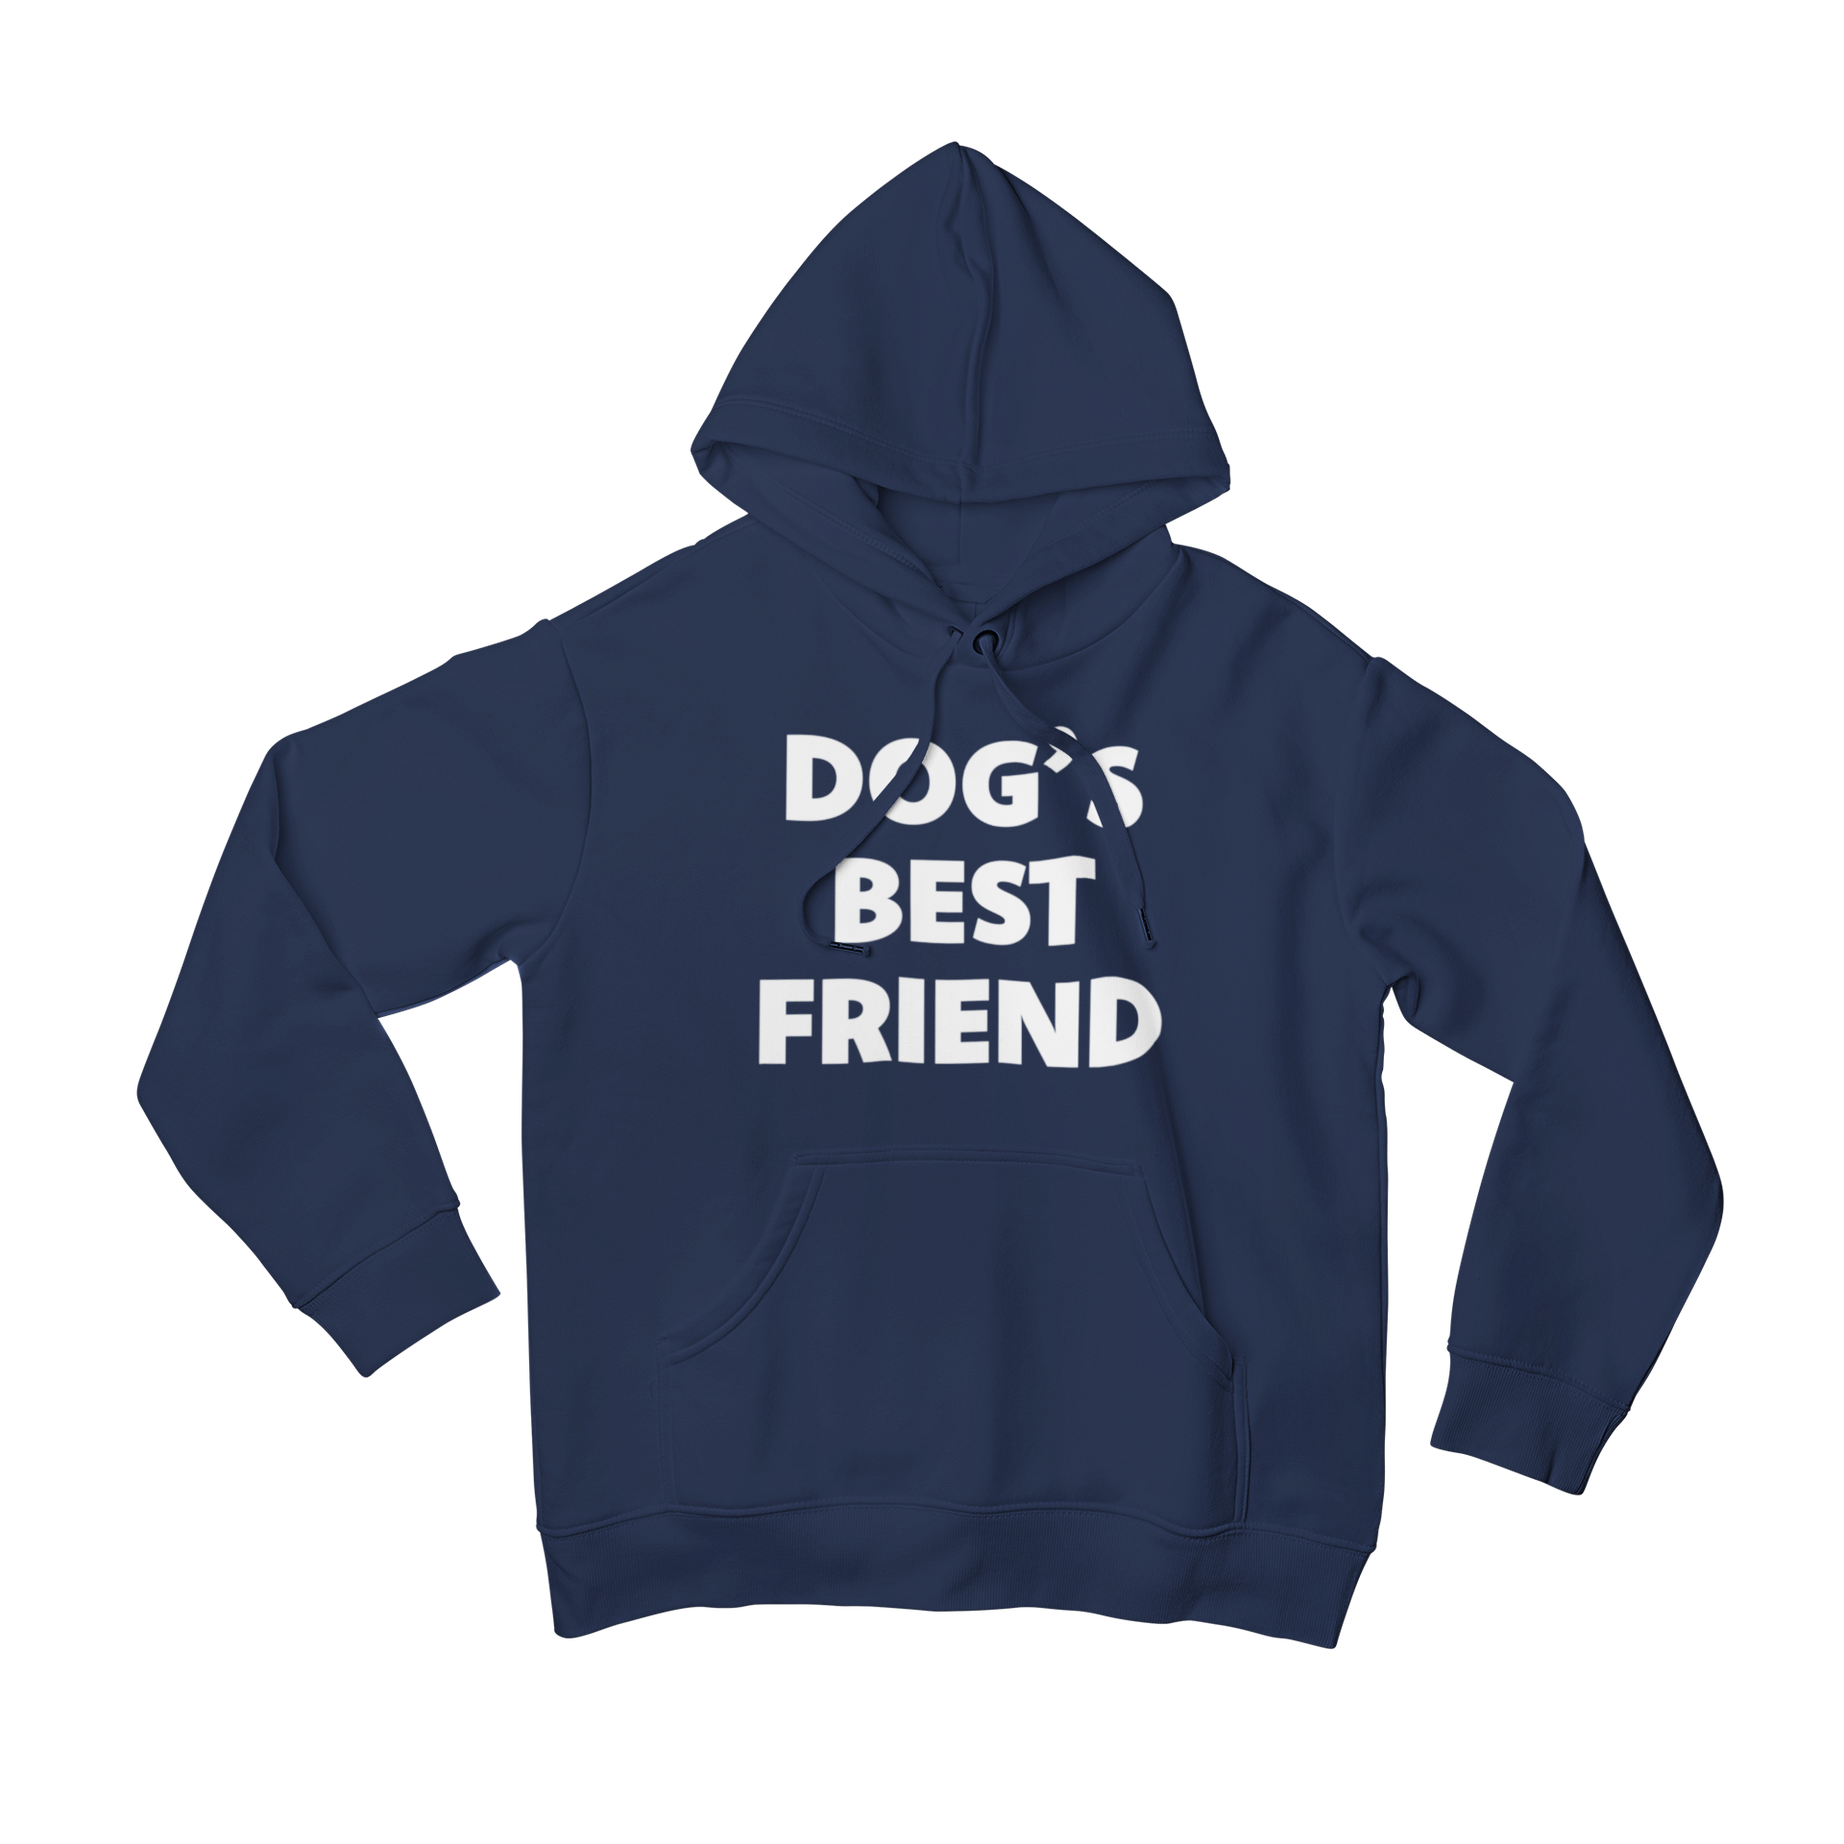 This hoodie says it all: you and your furry companion are truly inseparable. With a playful slogan front print, this hoodie is perfect for those who don't take themselves too seriously. Made of cozy material, this hoodie will quickly become your dog's best friend too.